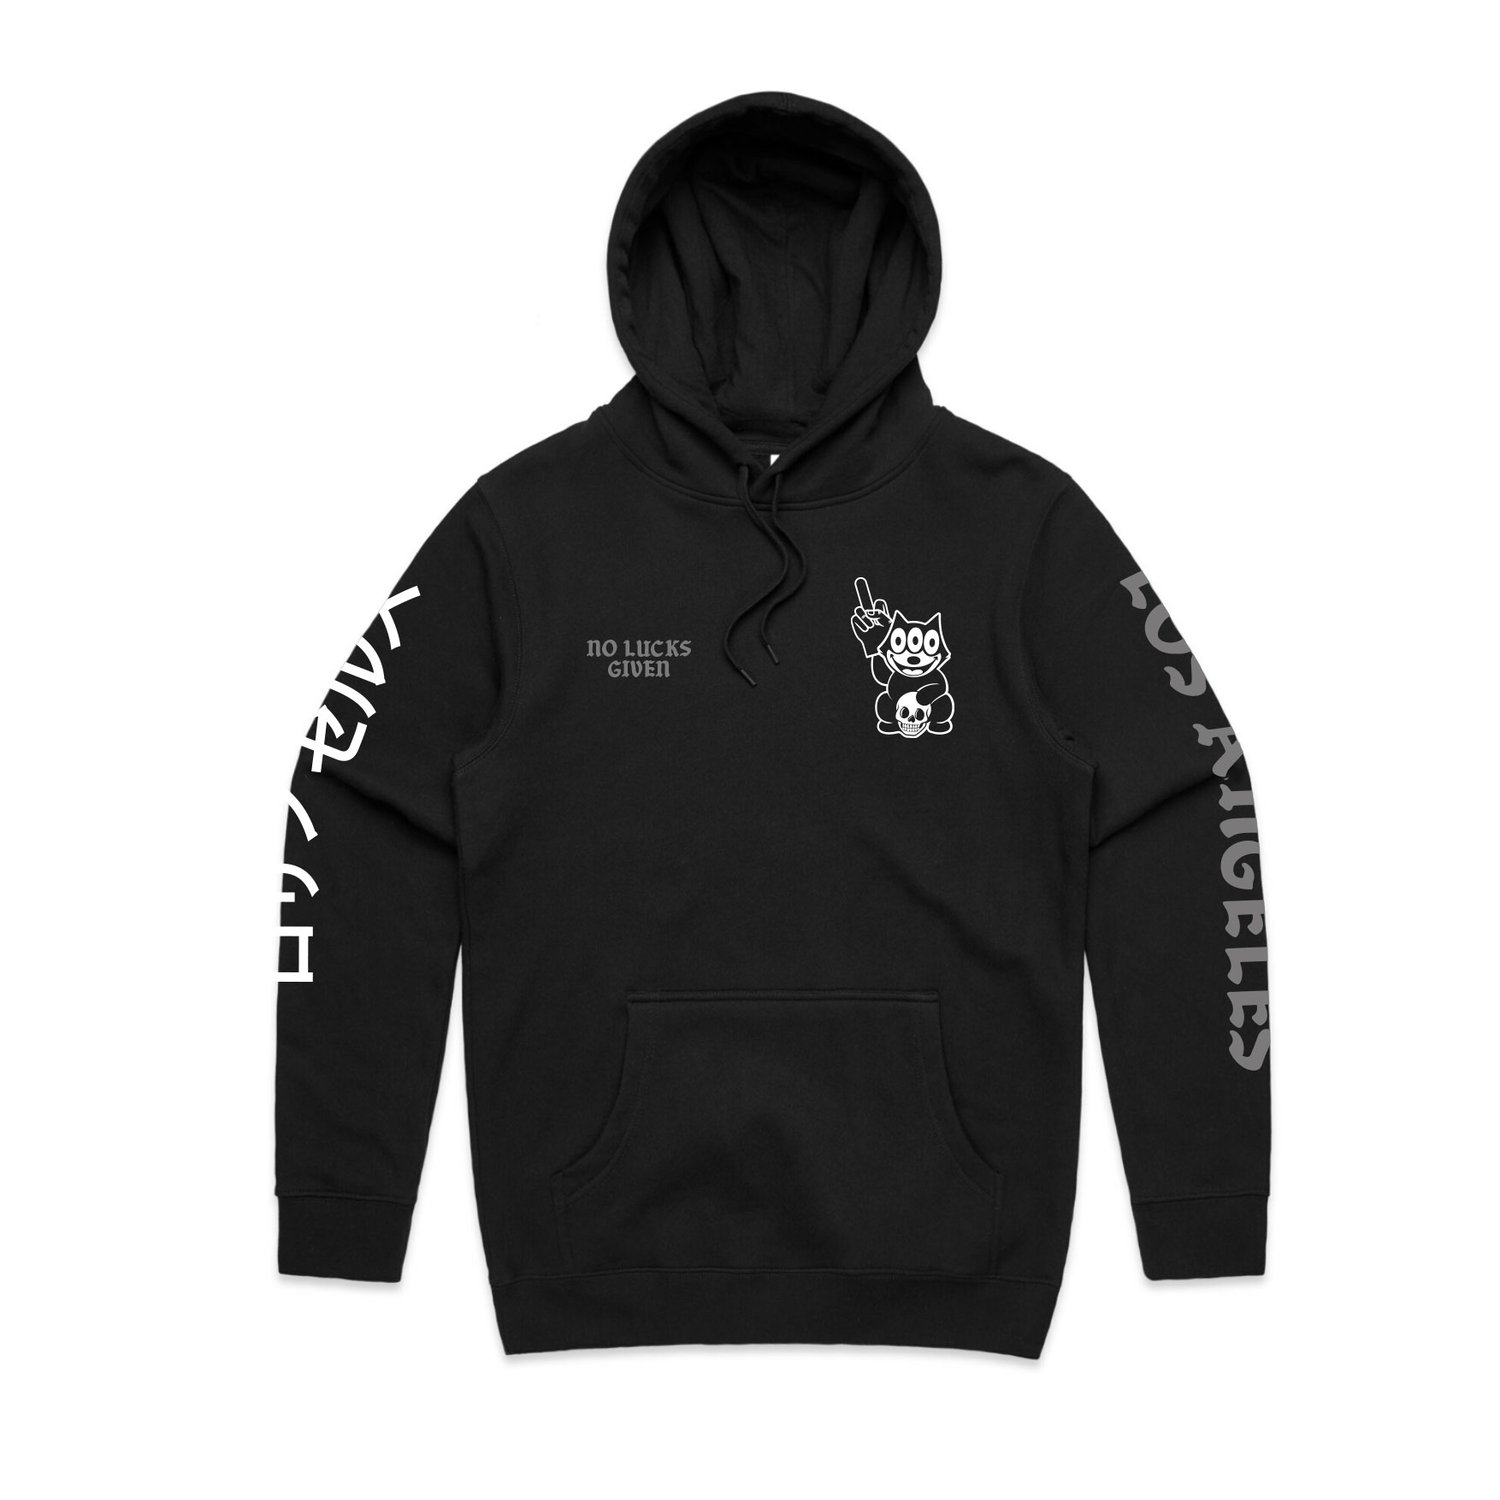 Image of No Lucks Given Hoodie